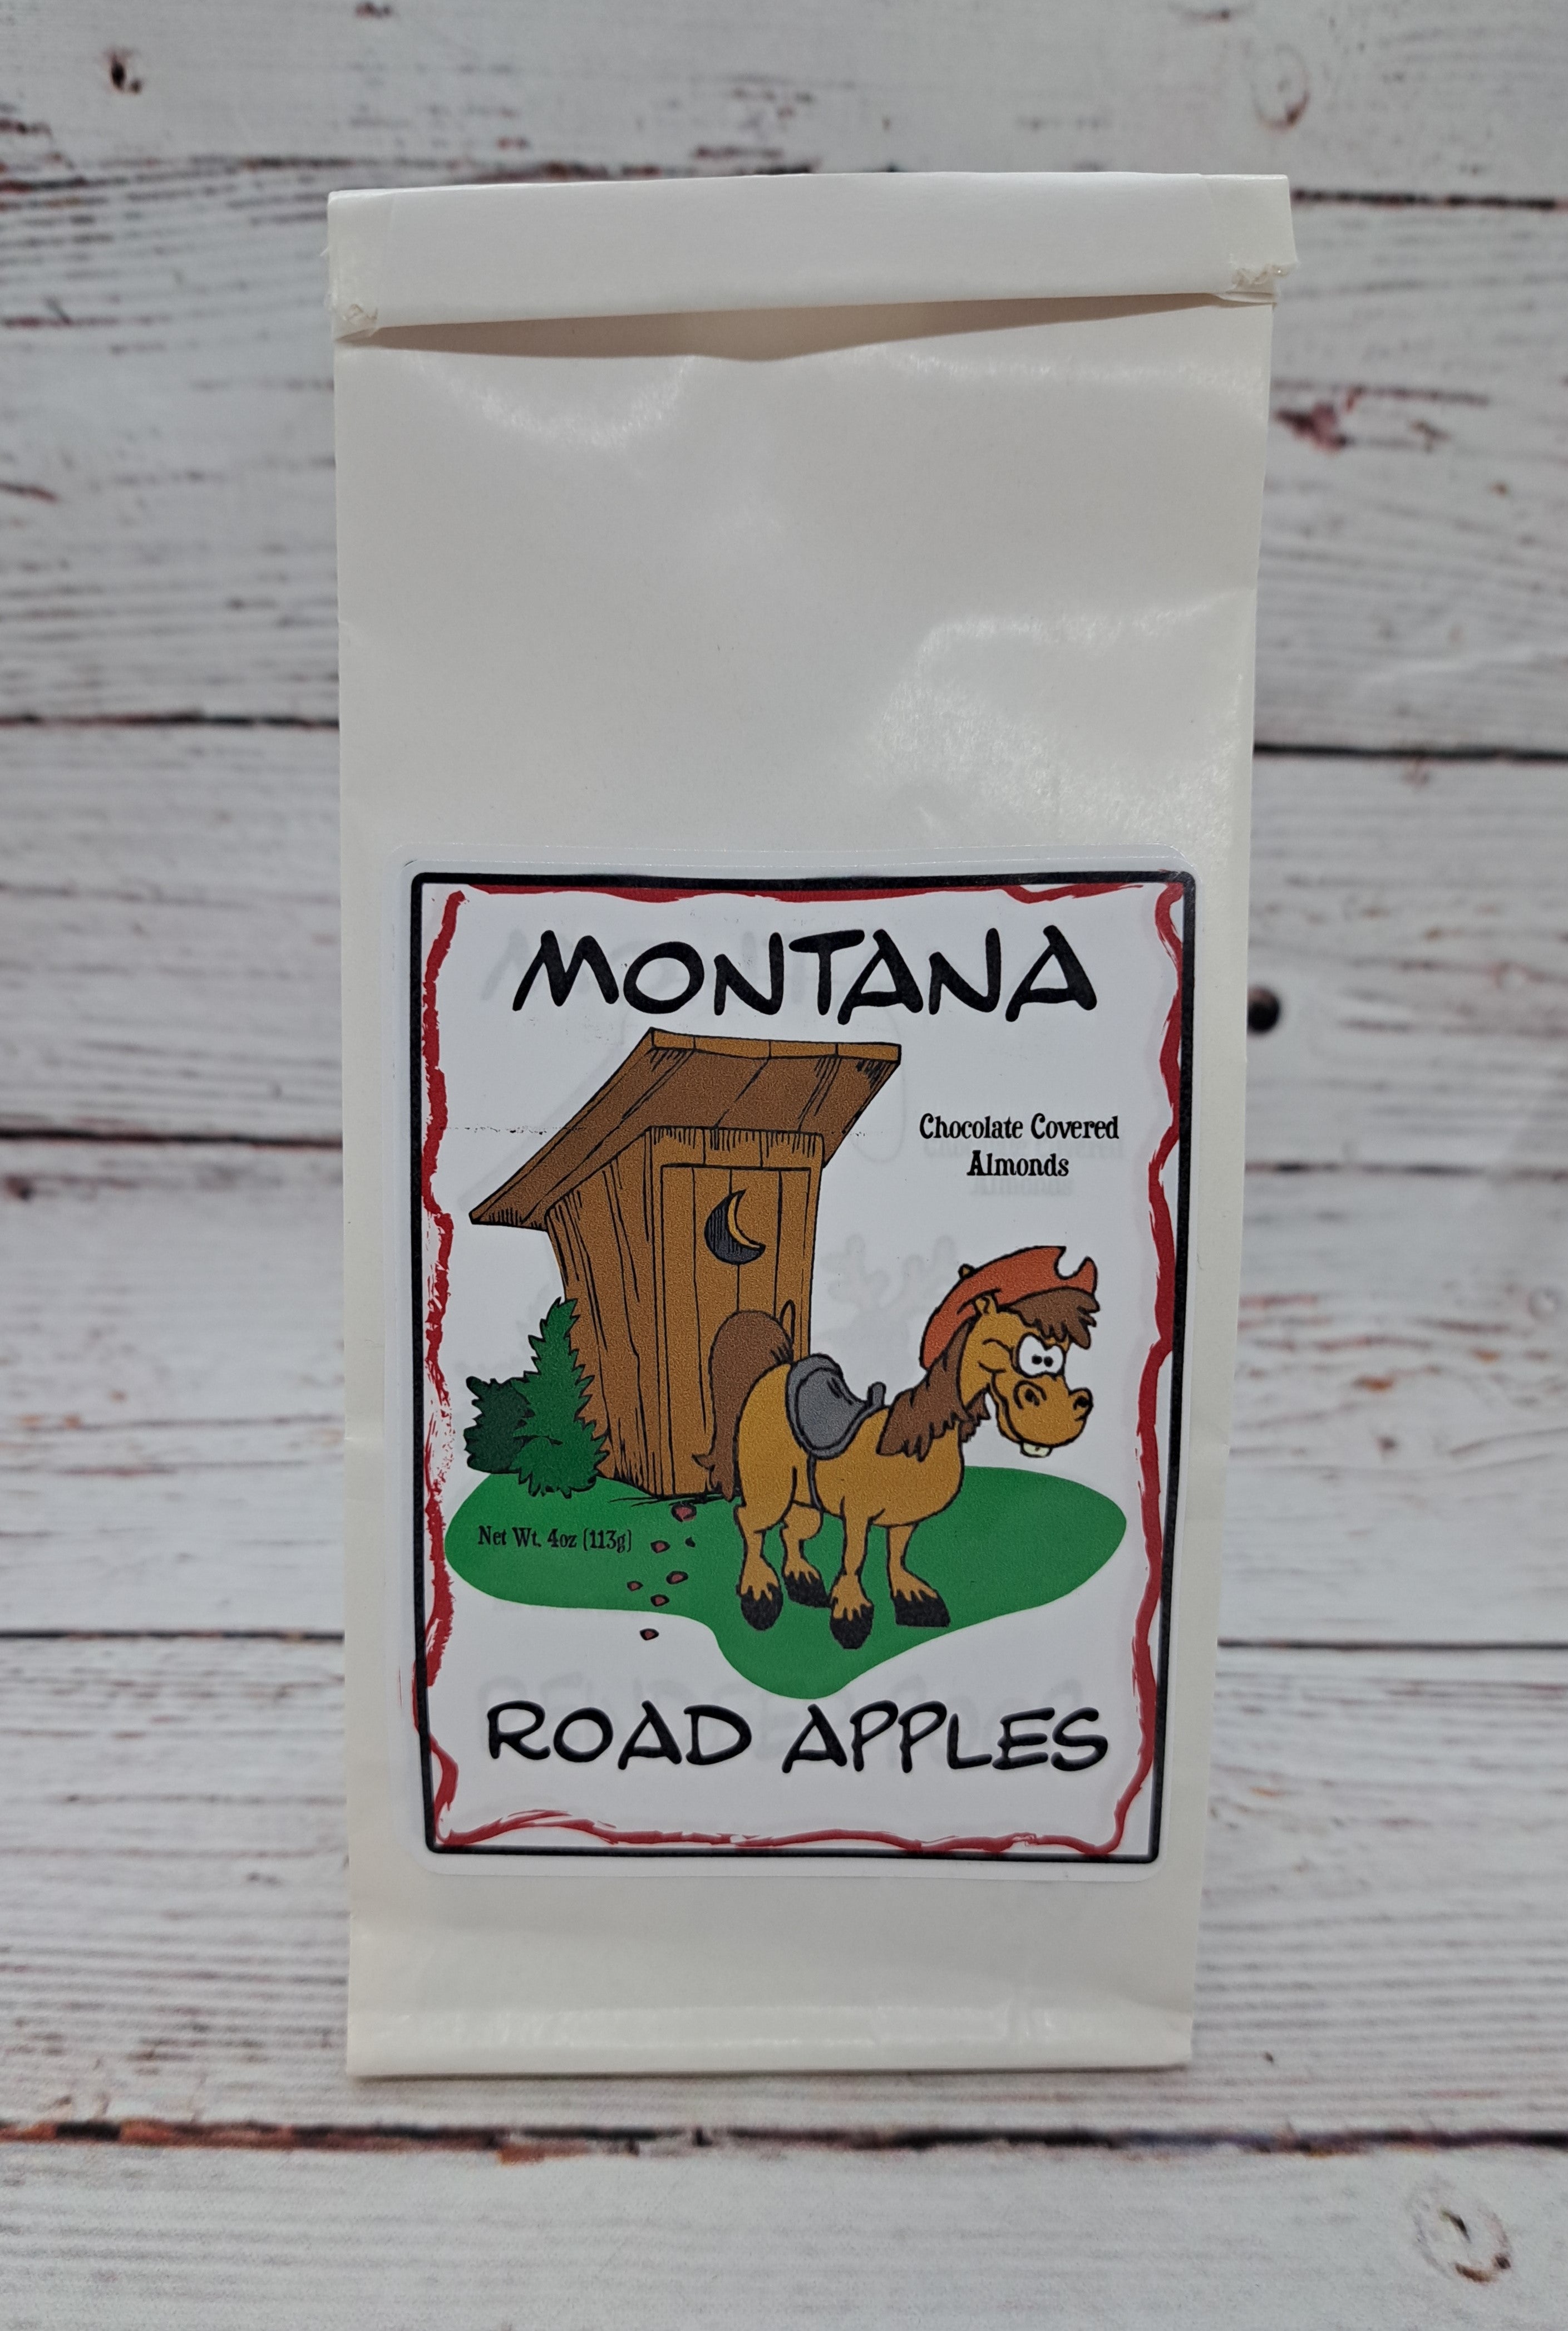 Montana Road Apples Chocolate Covered Almonds